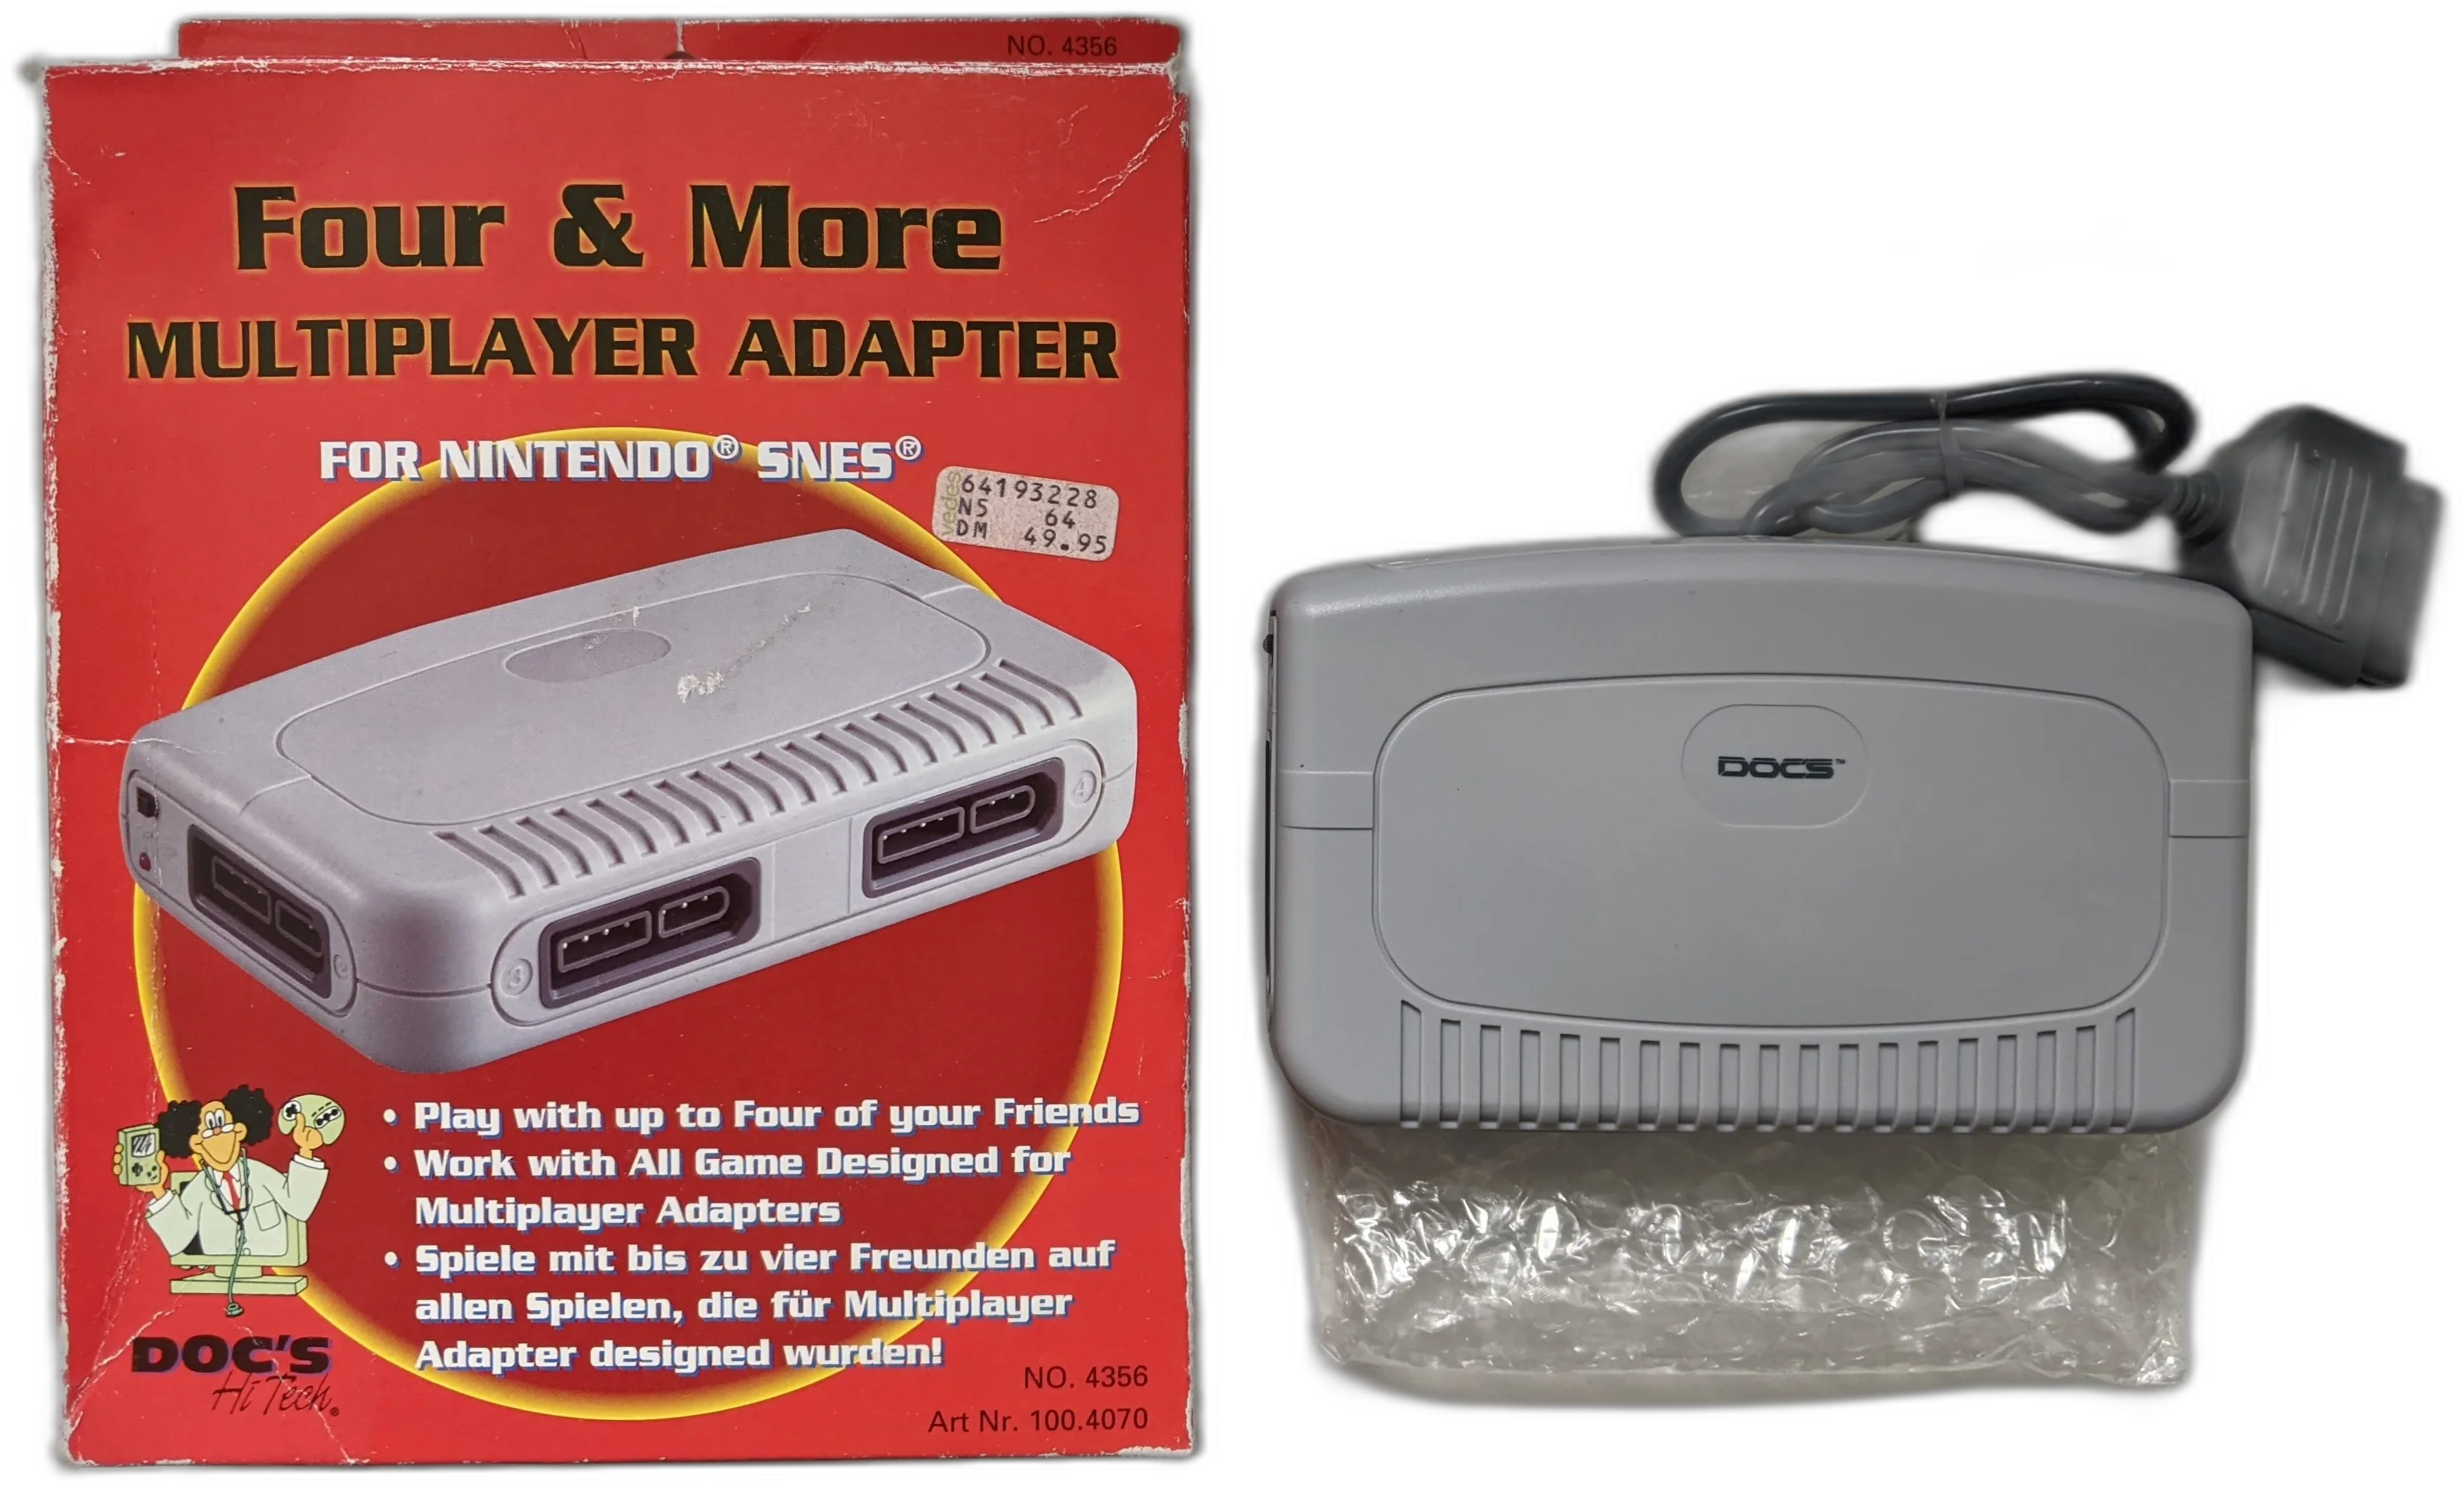  Doc&#039;s Hi Tech SNES Four &amp; More Multiplayer Adapter